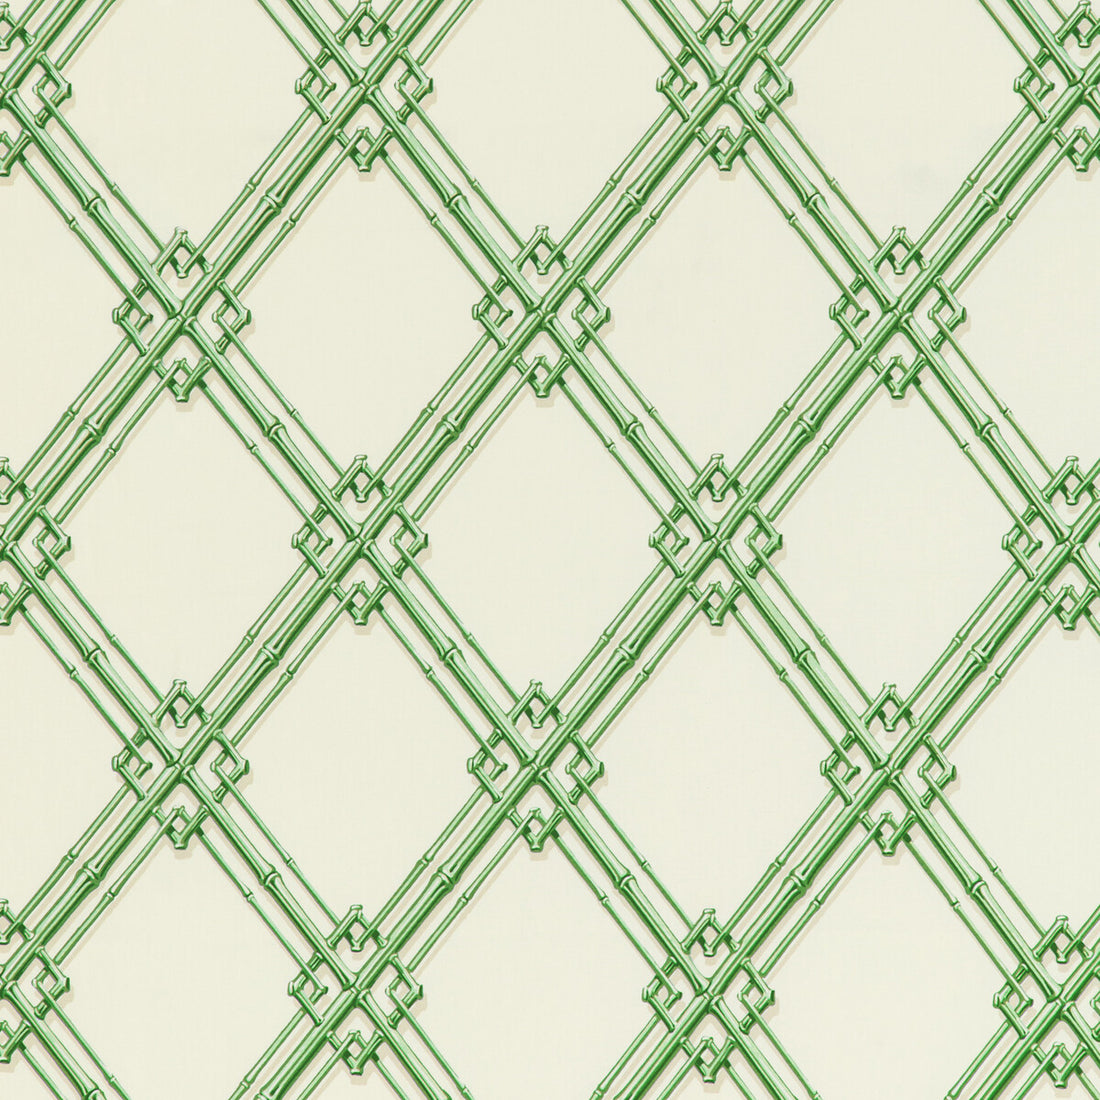 Le Bambou Print fabric in green color - pattern 8020127.3.0 - by Brunschwig &amp; Fils in the Louverne collection